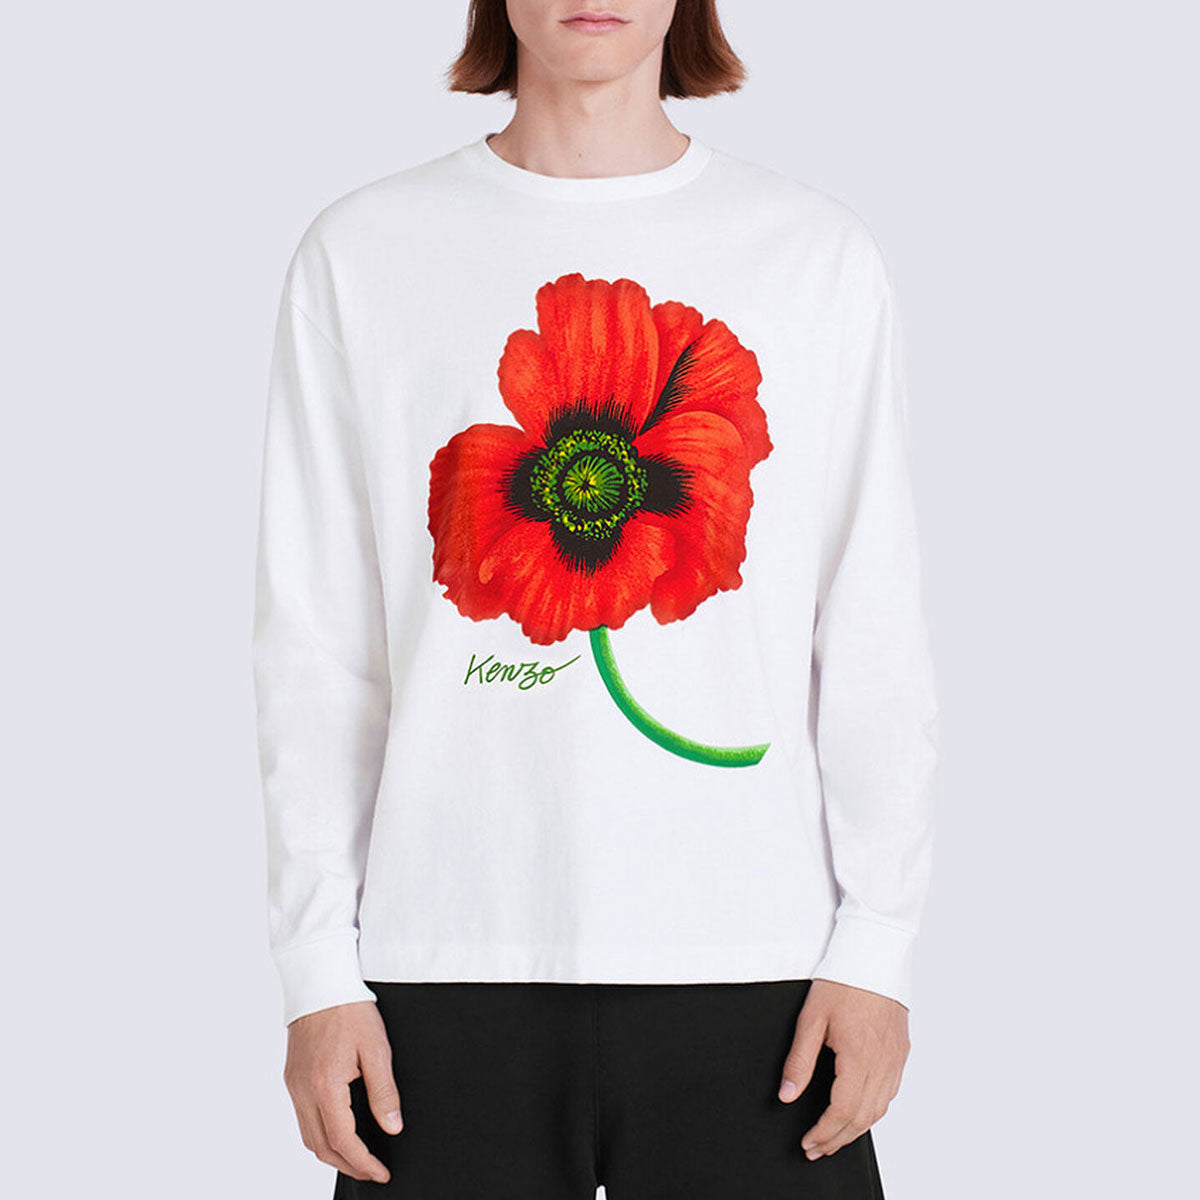 KENZO POPPY' ロングスリーブ Tシャツ Why are you here?